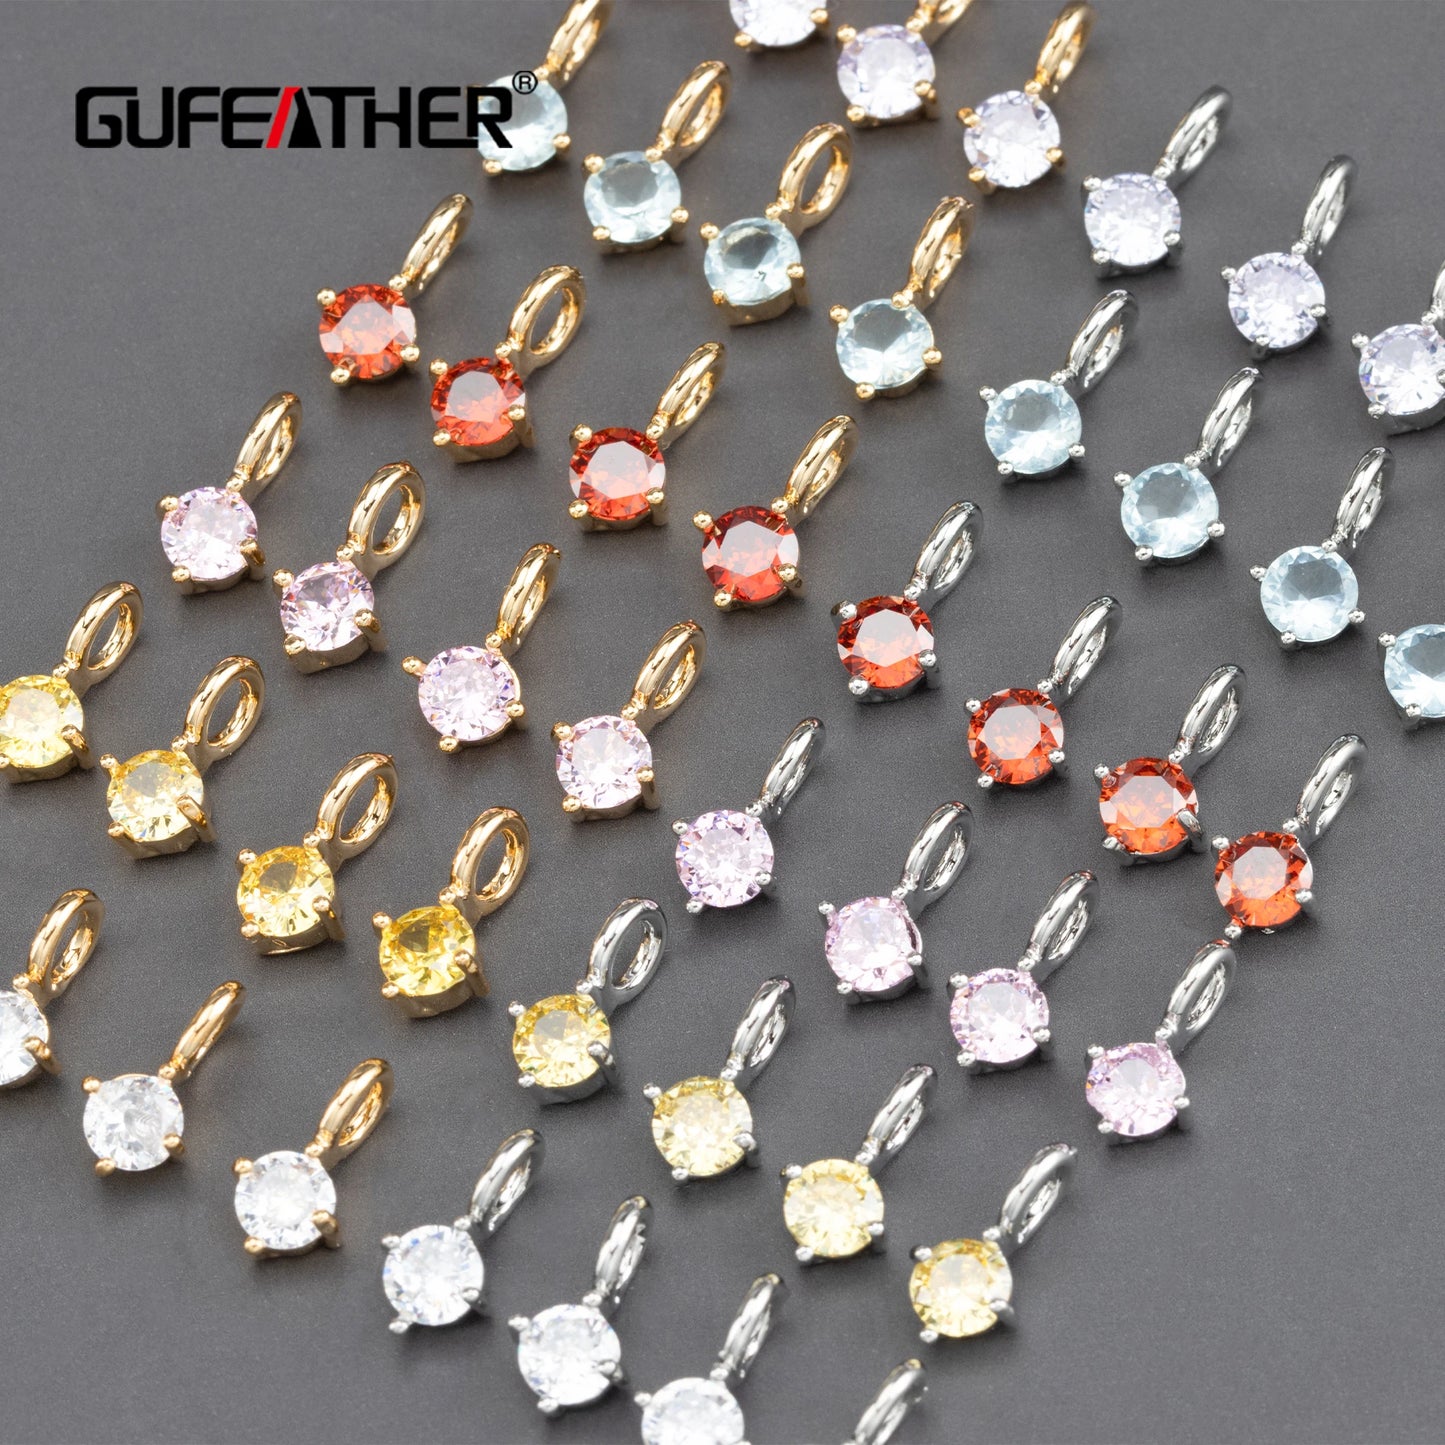 GUFEATHER MA77,jewelry accessories,nickel free,18k gold rhodium plated,copper,zircon,charms,diy pendant,jewelry making,10pcs/lot